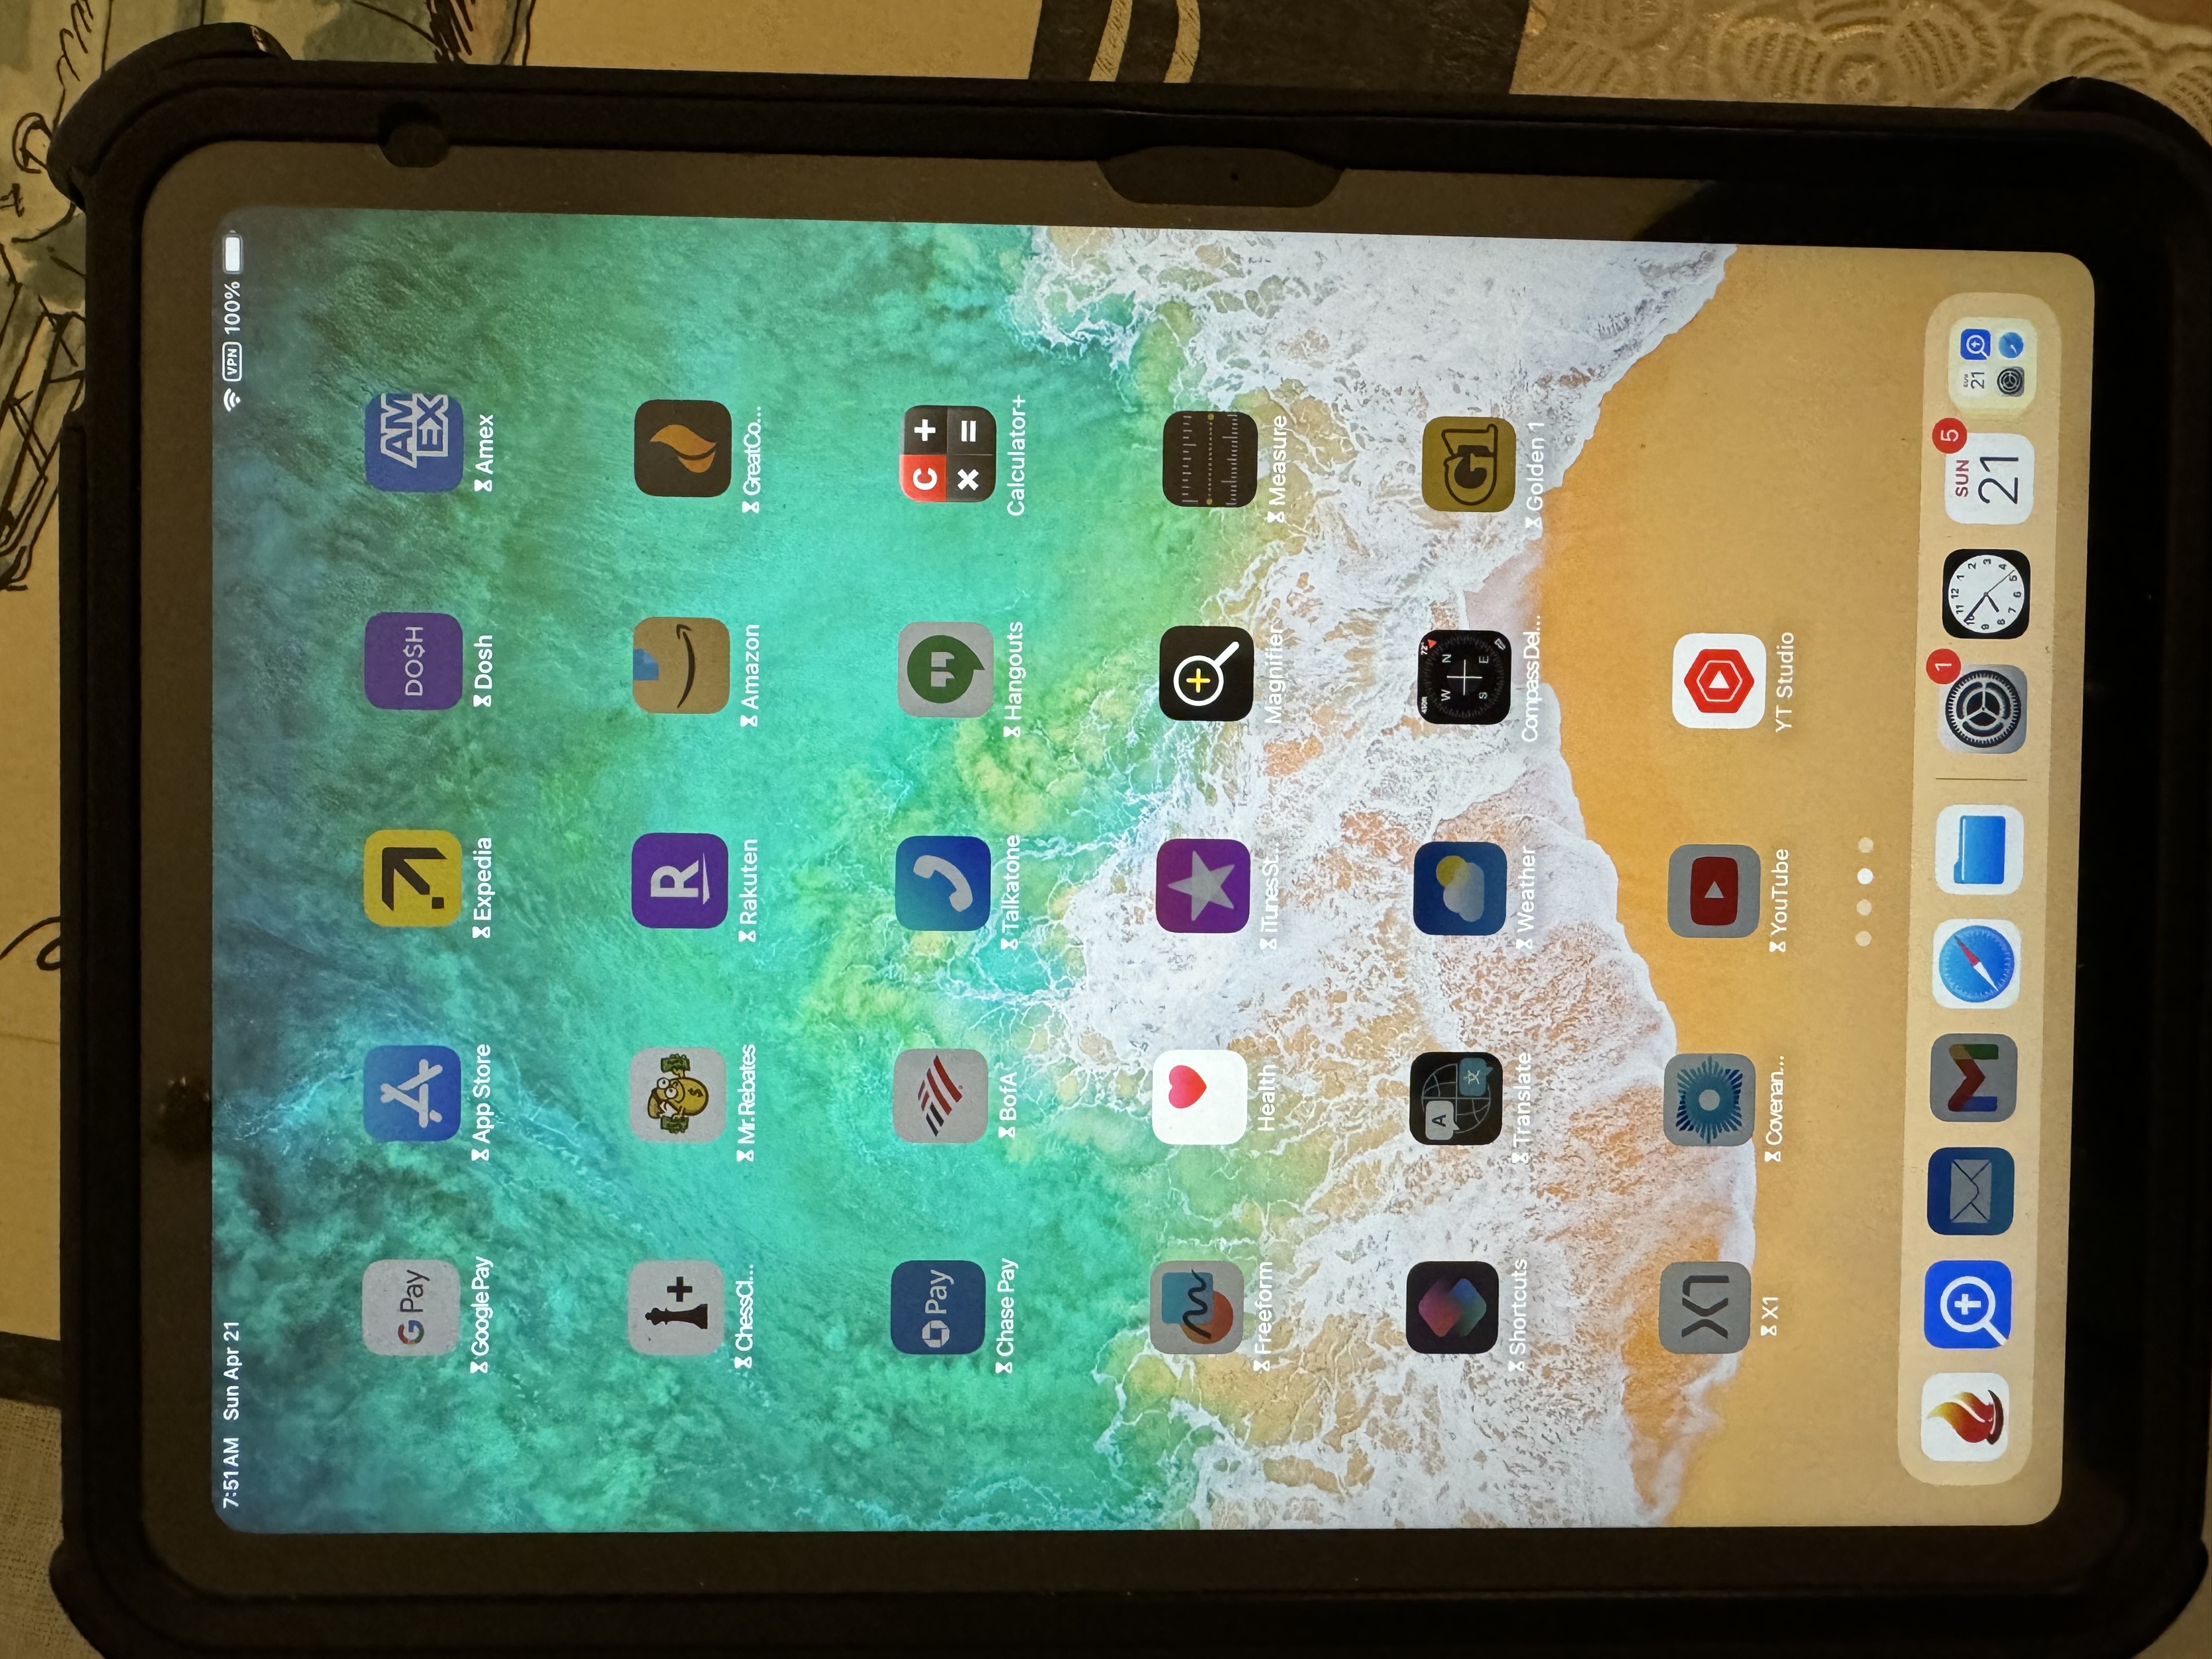 IPad apps blacked out